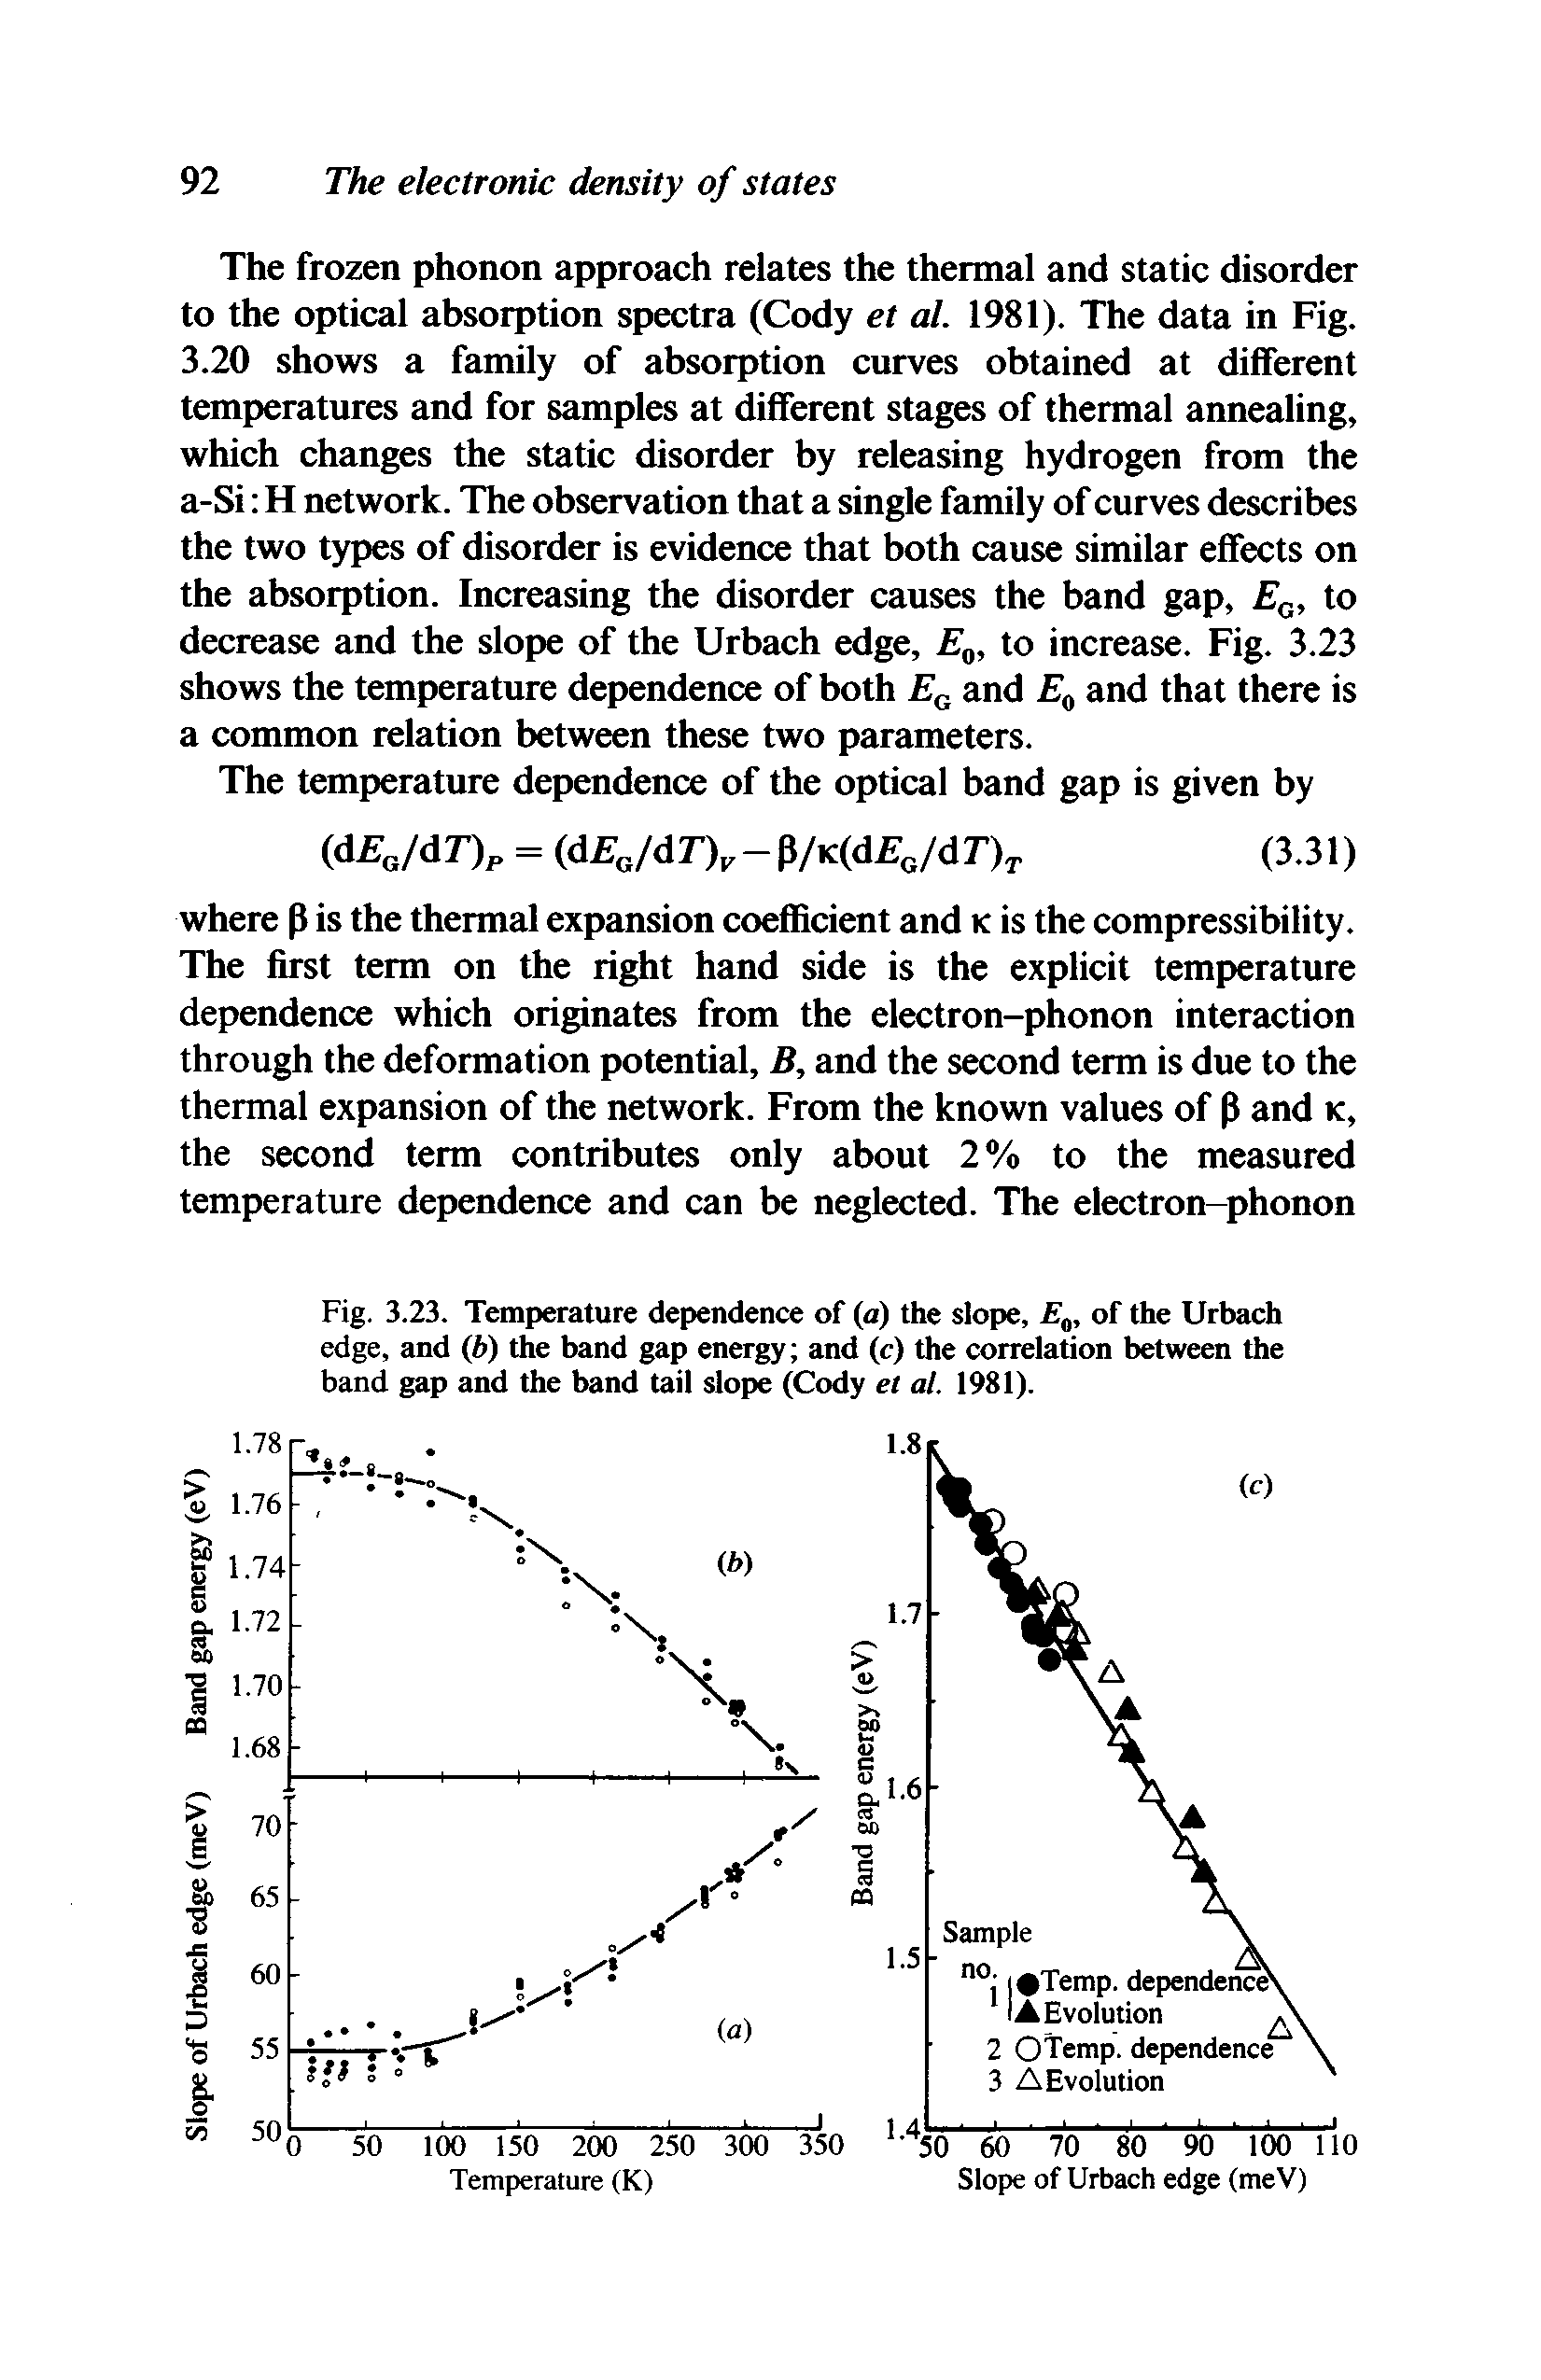 Fig. 3.23. Temperature dependence of (a) the slope, of the Urbach edge, and (6) the band gap energy and (c) the correlation between the band gap and the band tail slope (Cody et al. 1981).